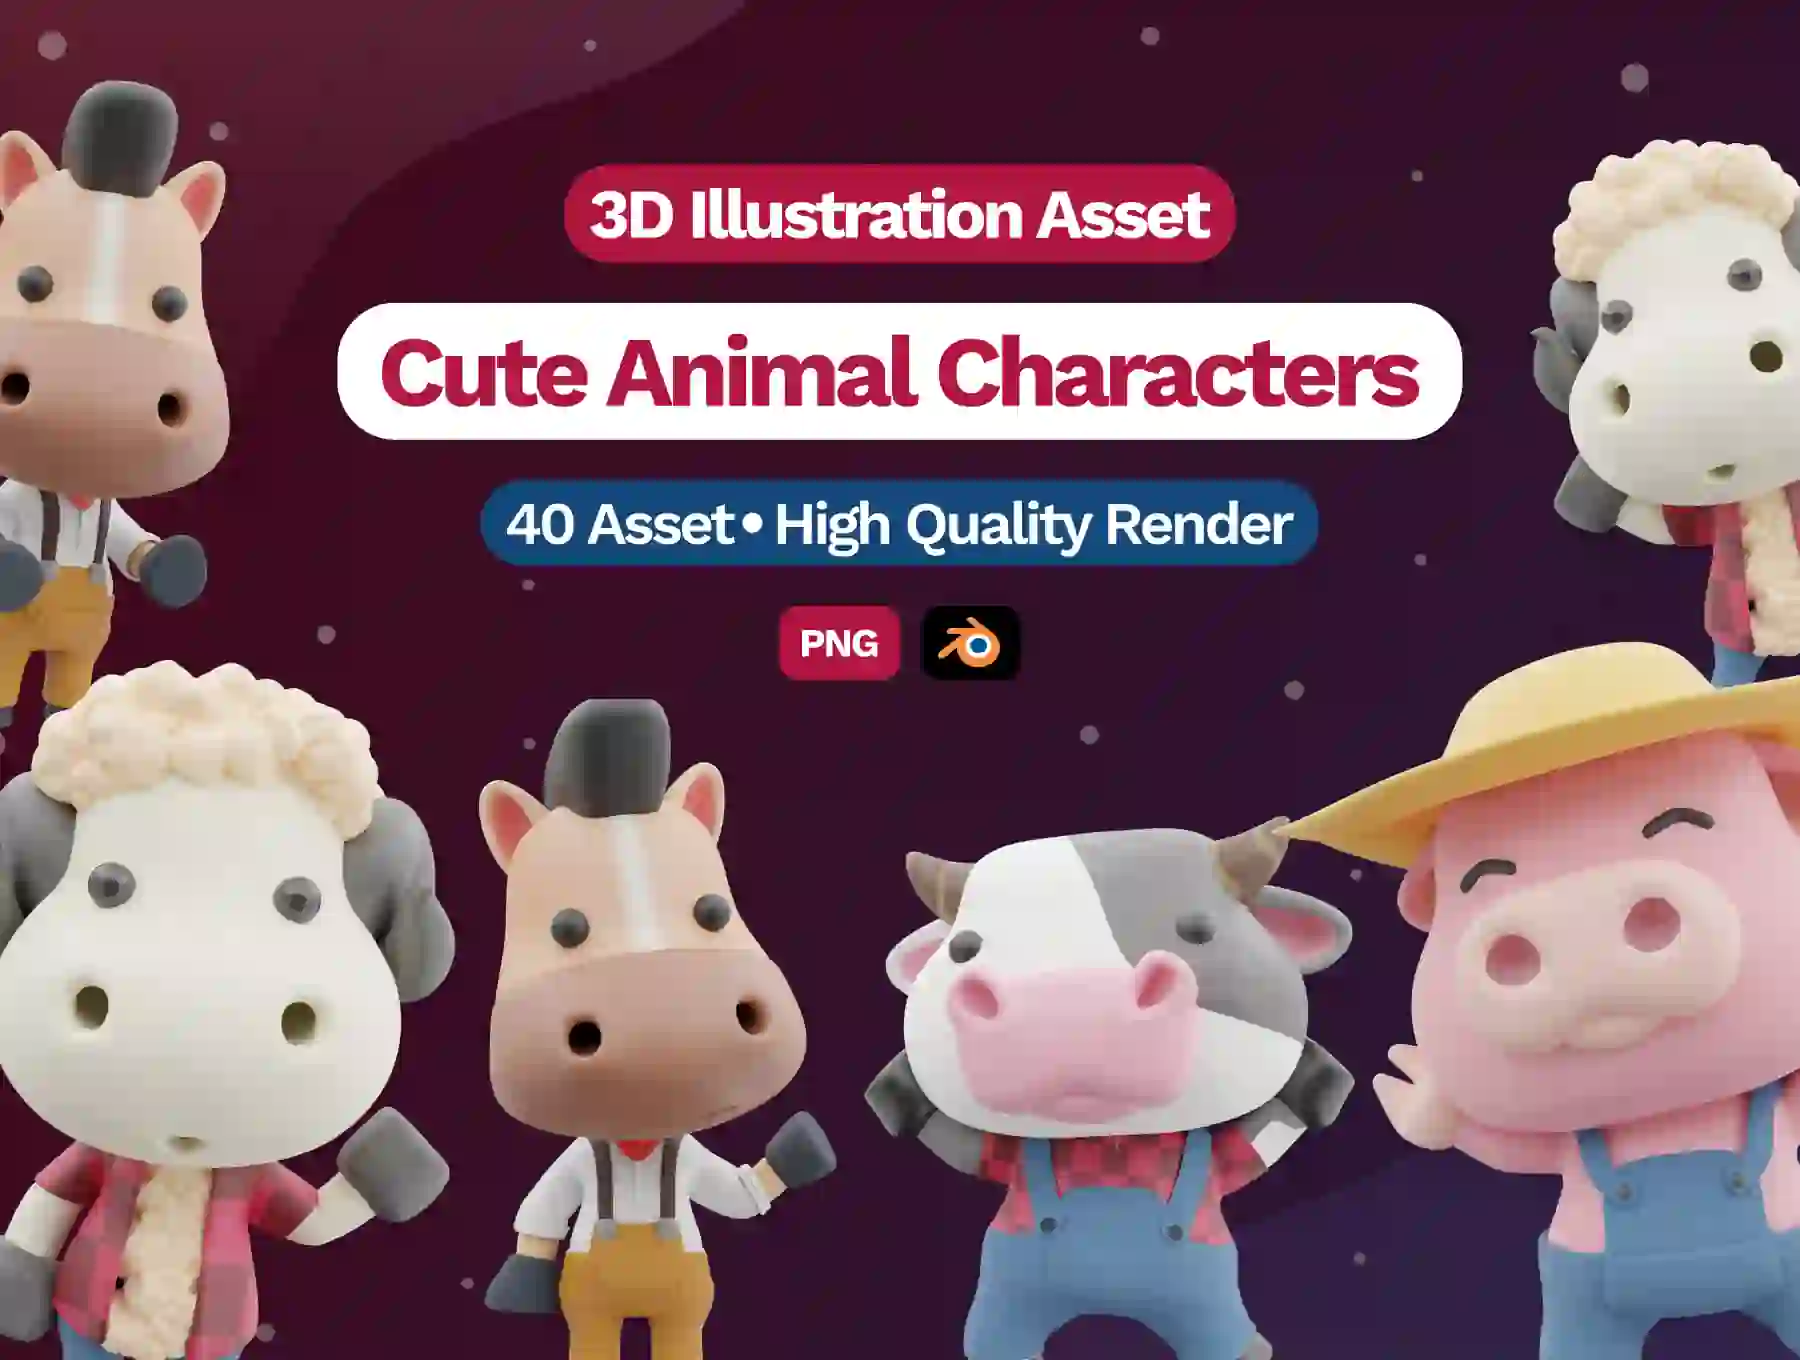 3D Cute Animal Characters Illustration